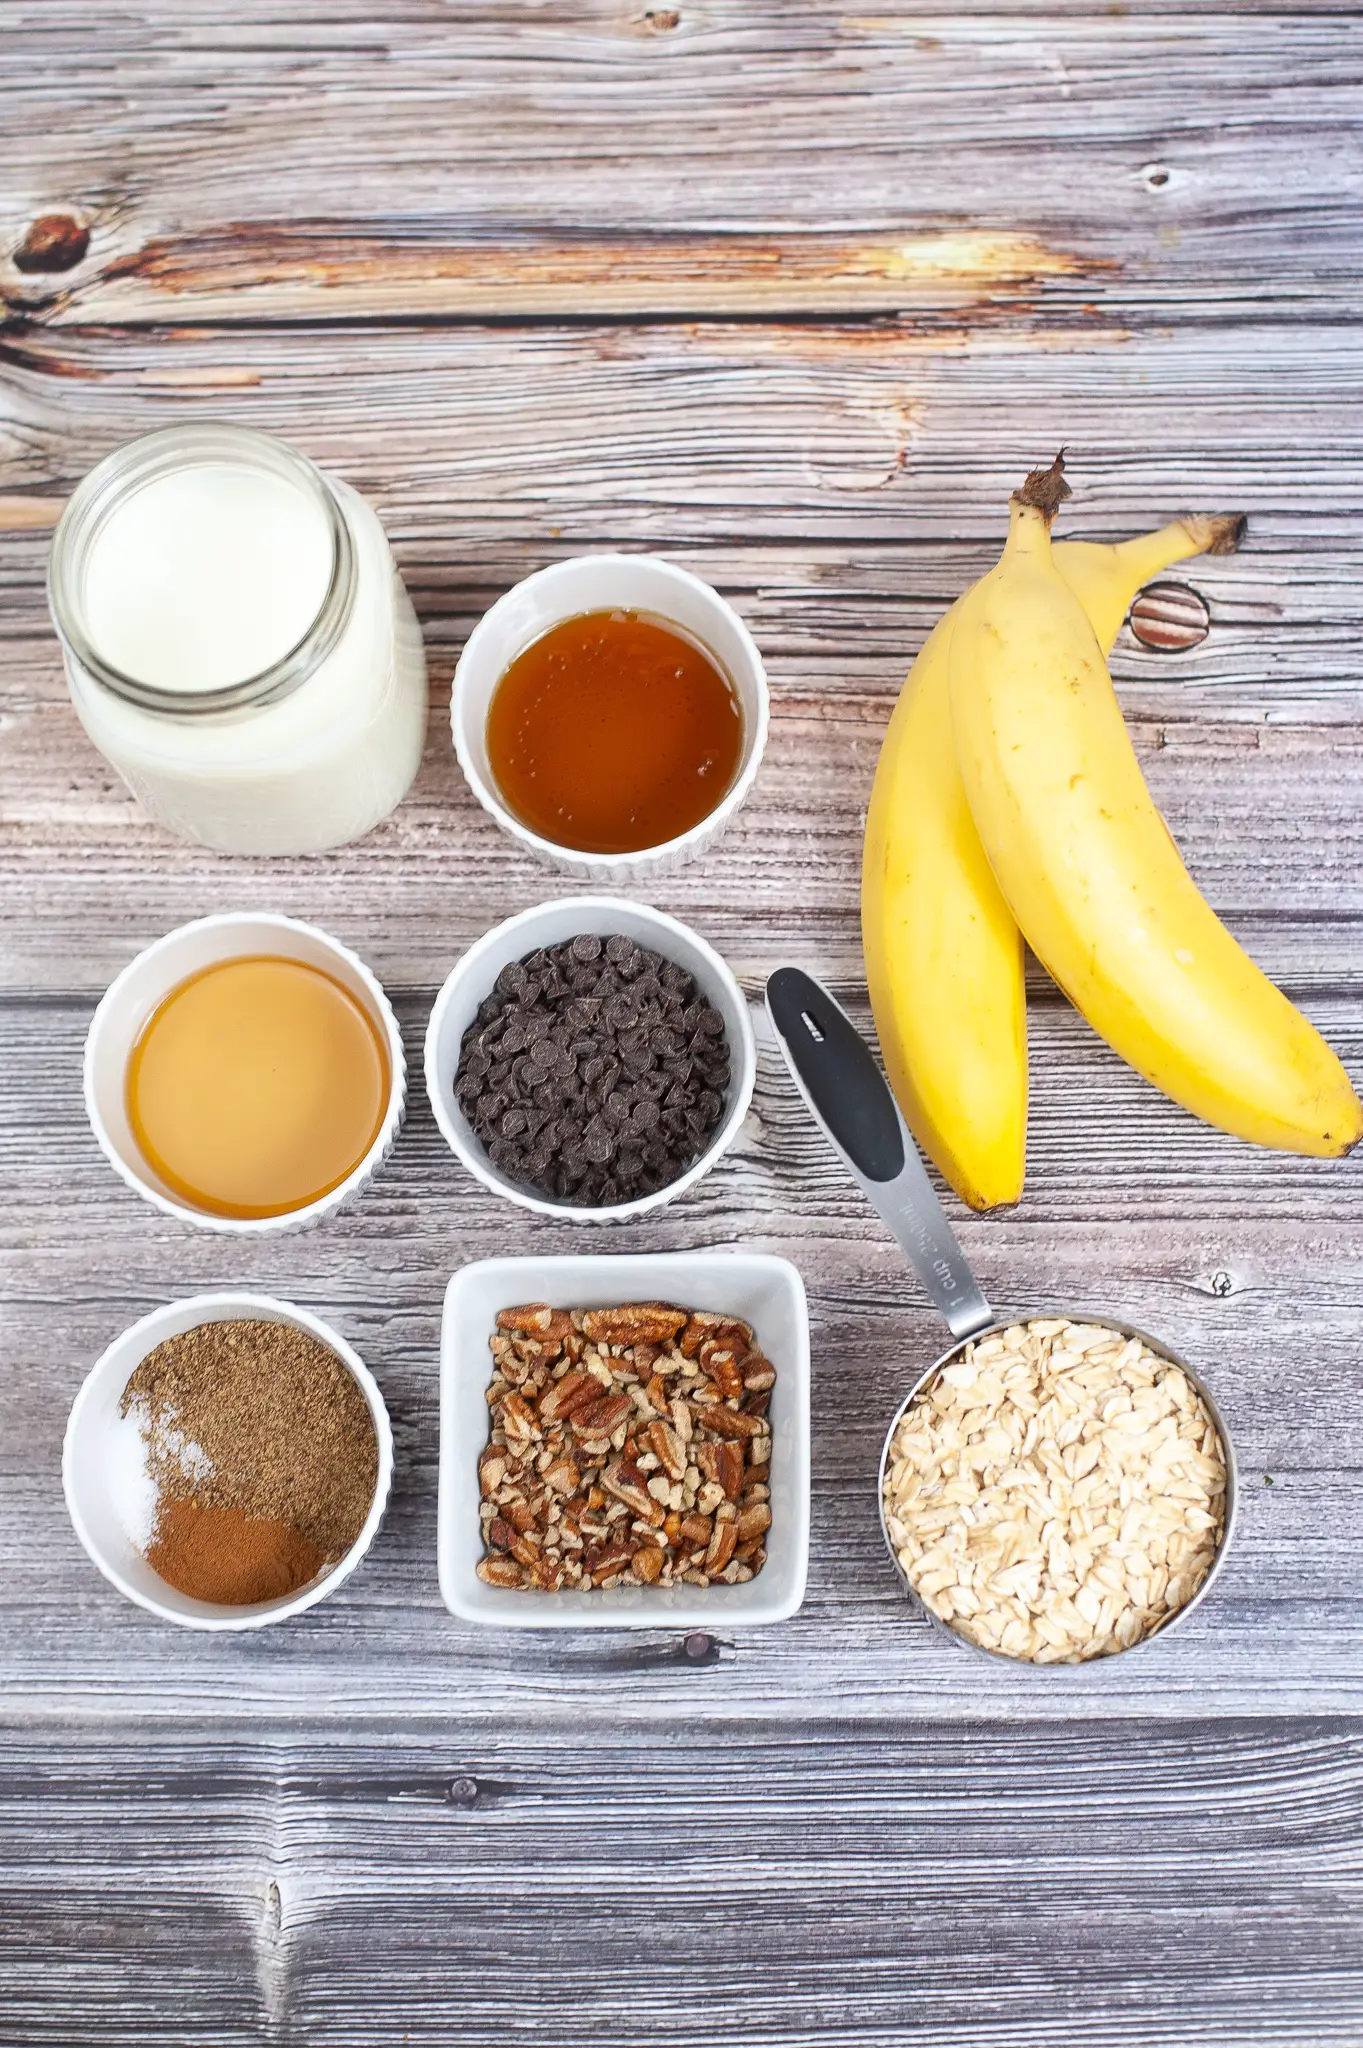 Ingredients for Chocolate Chip Banana Overnight Oats.